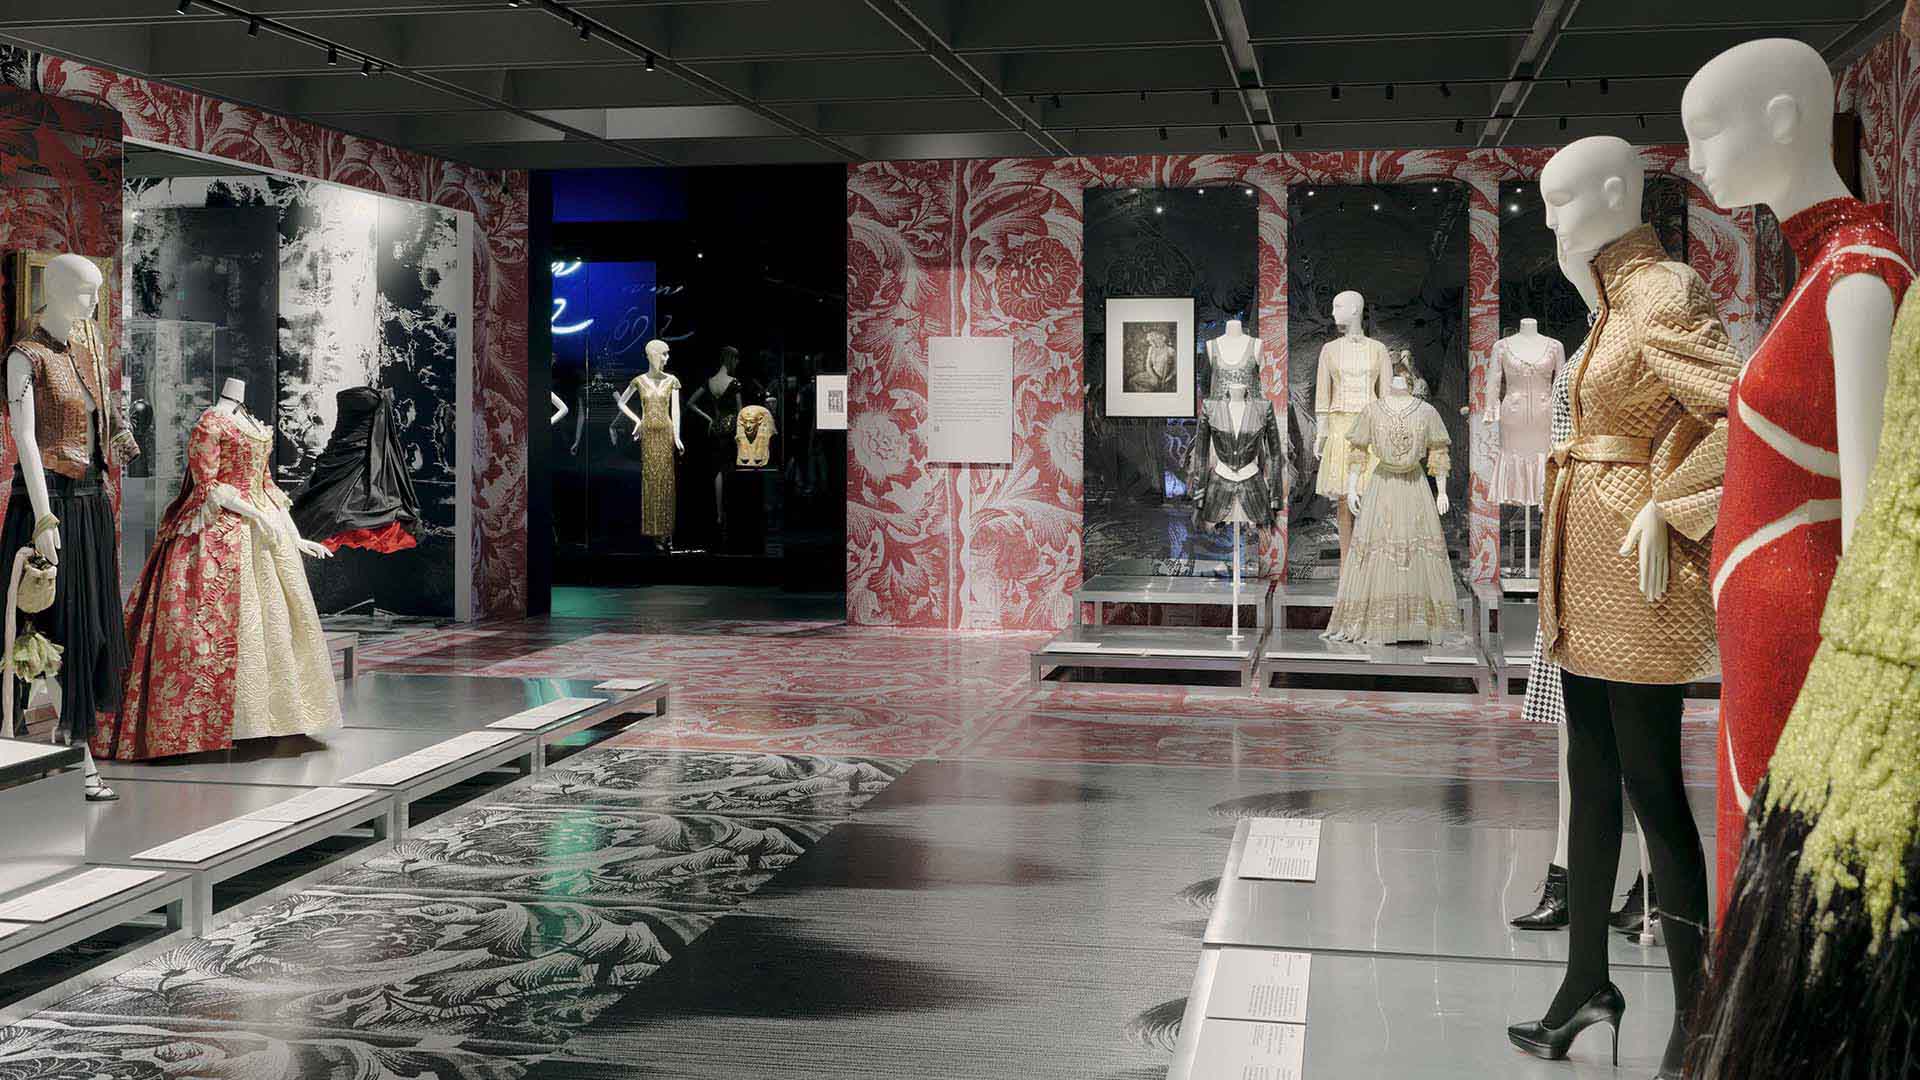 Now Open: A Blockbuster Alexander McQueen Exhibition Featuring 120-Plus Garments Has Arrived in Australia